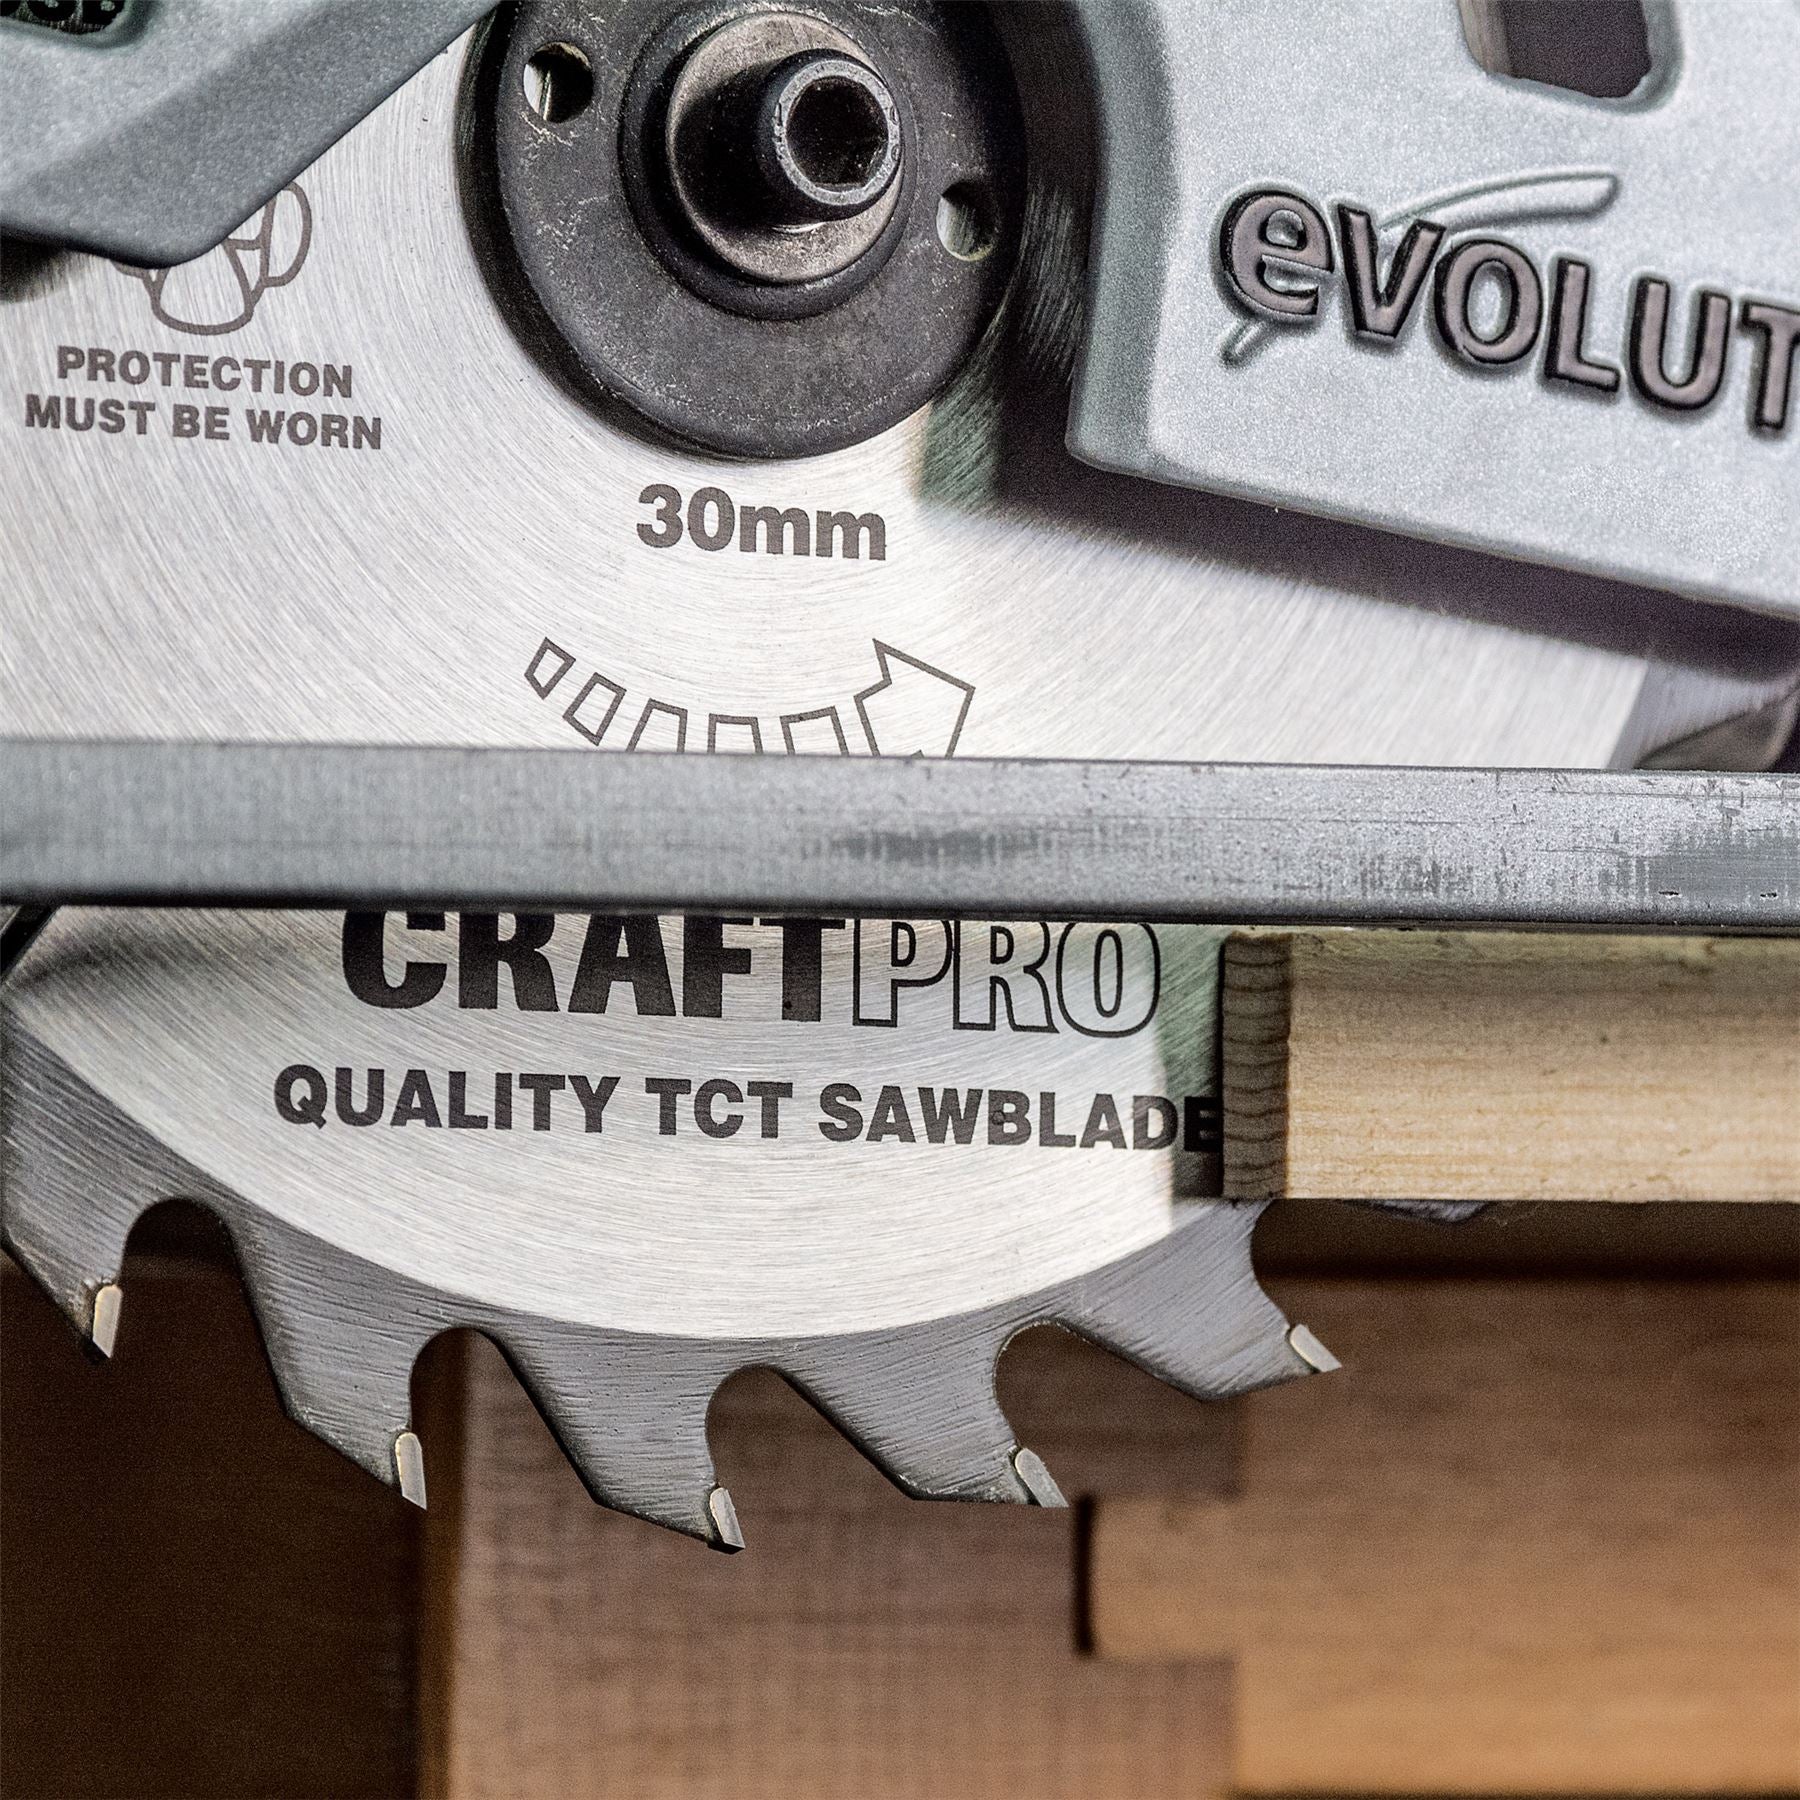 Trend Craft Pro 190mm Diameter 30mm Bore 24 Tooth Combination Cut Saw Blade For Hand Held Circular Saws. CSB/19024